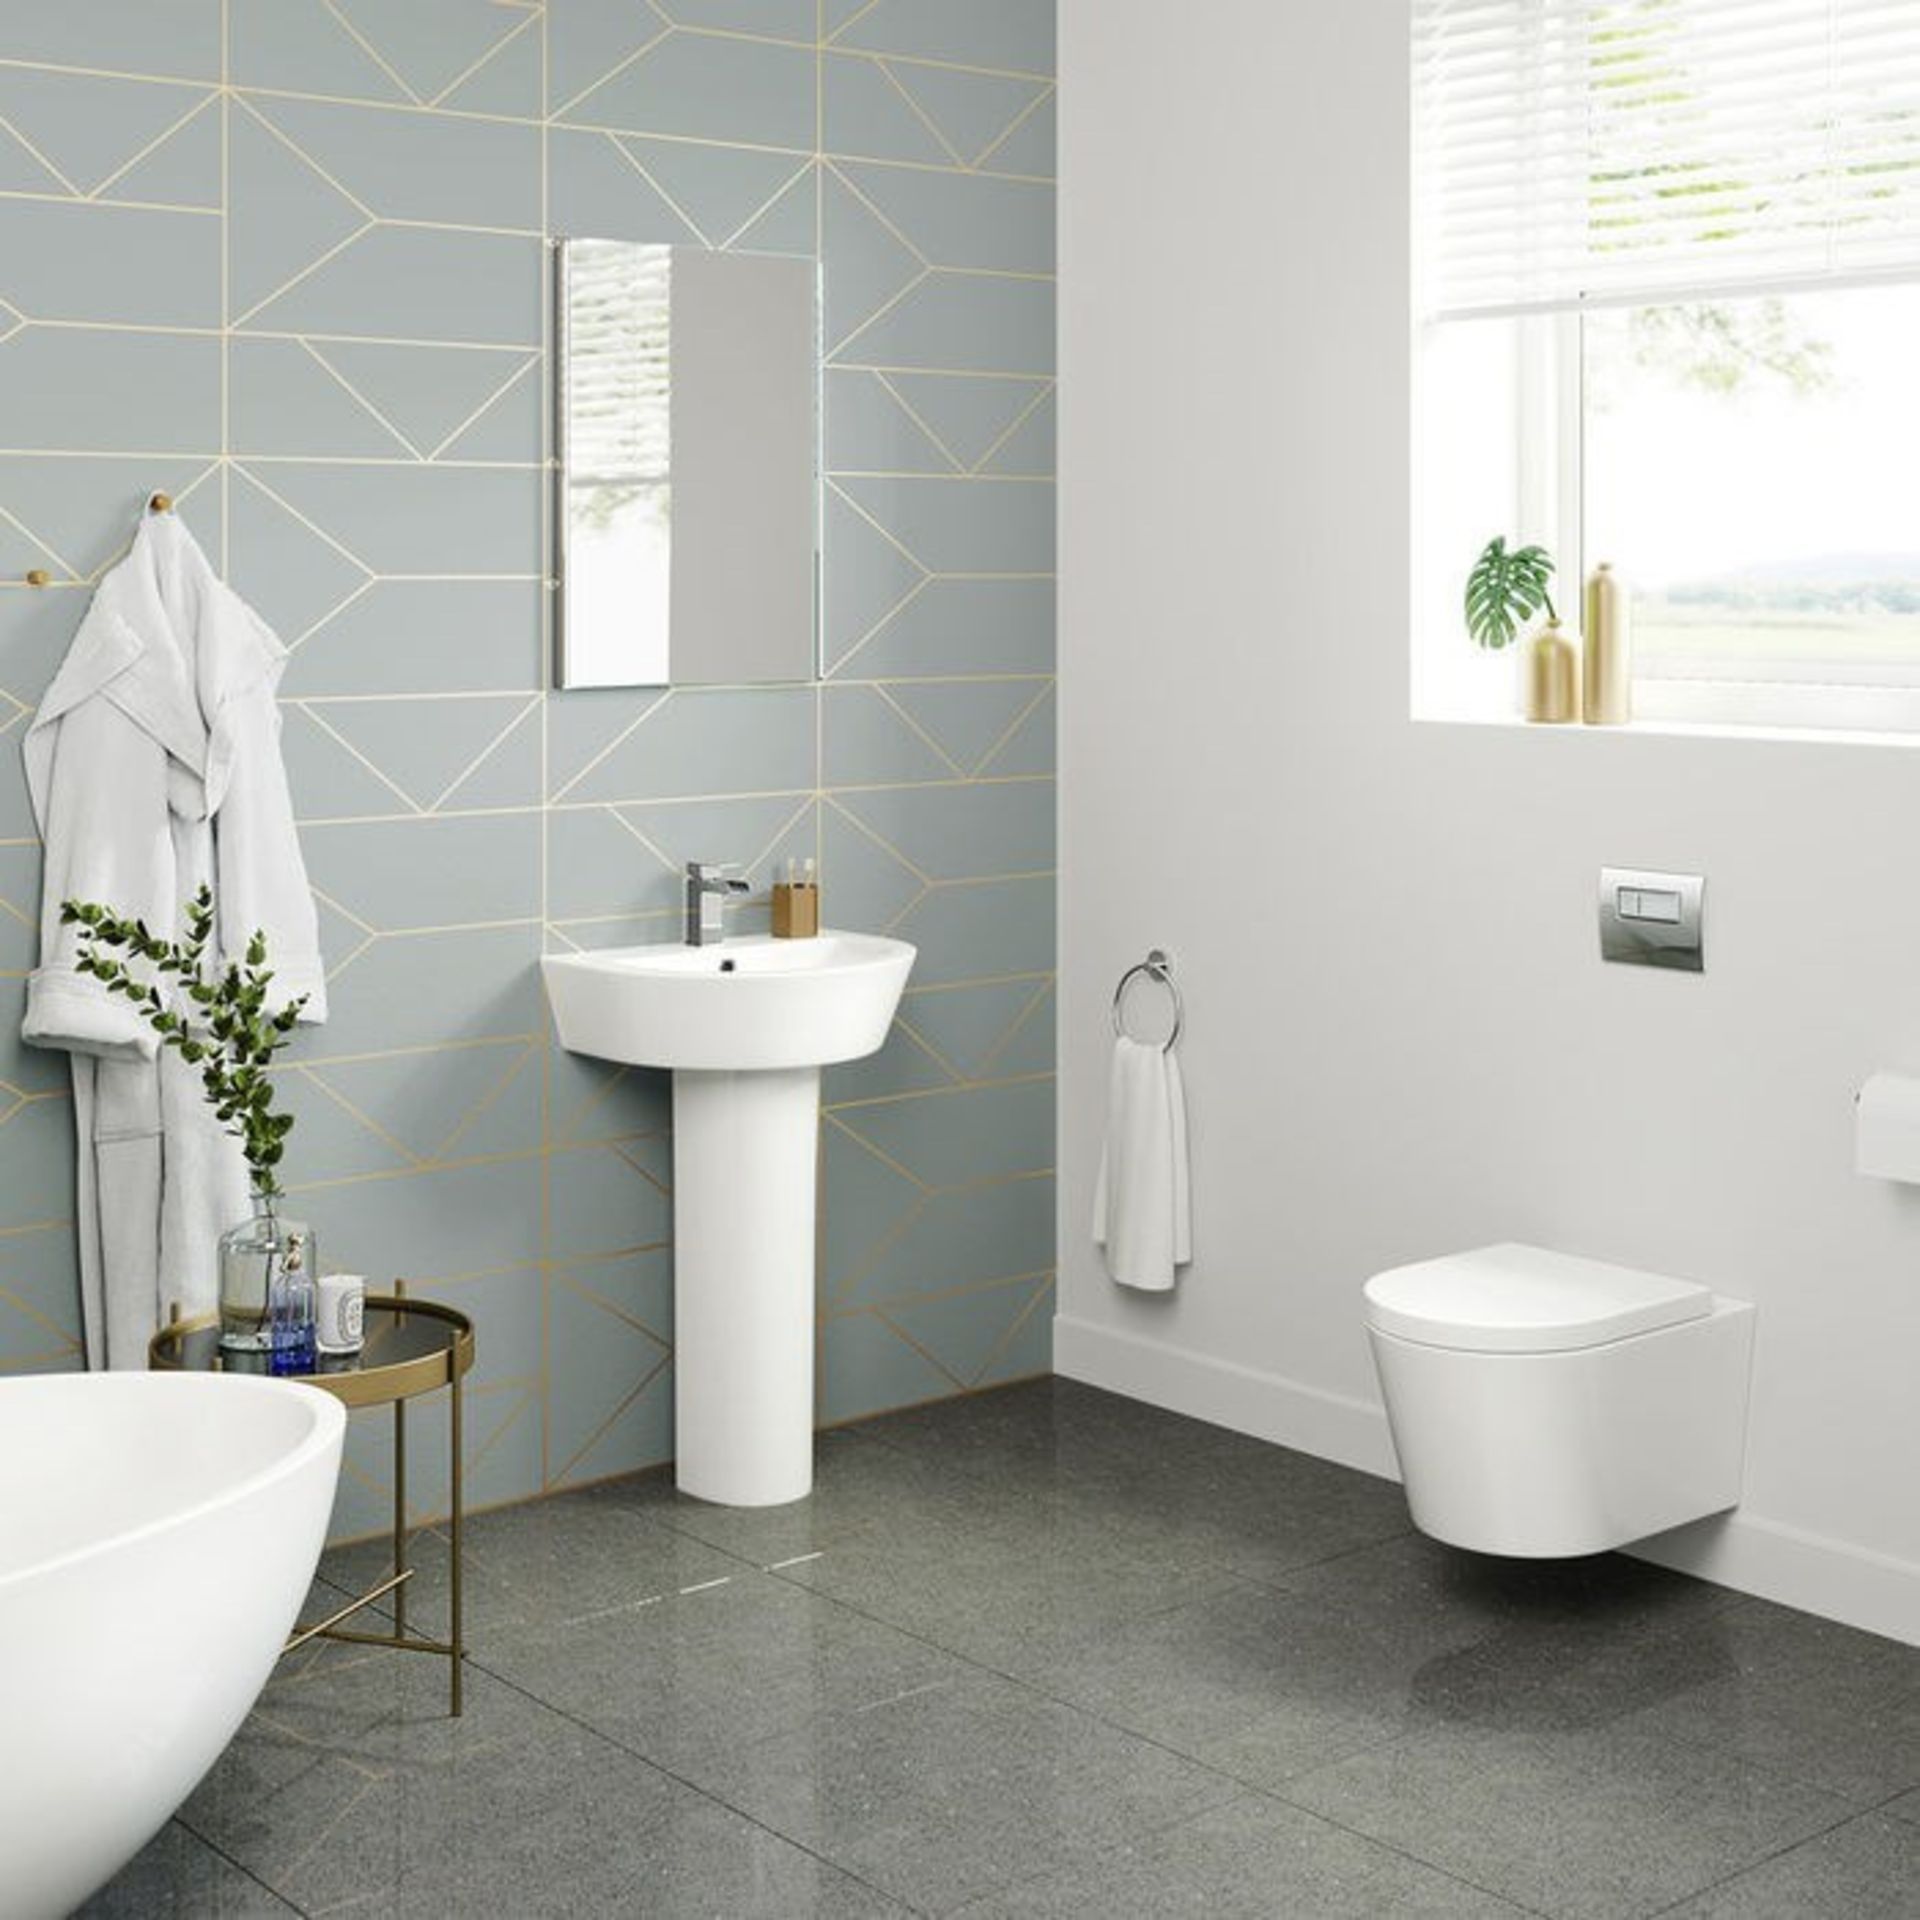 NEW & BOXED Lyon II Wall Hung Toilet inc Luxury Soft Close Seat. RRP £349.99. - Image 2 of 2